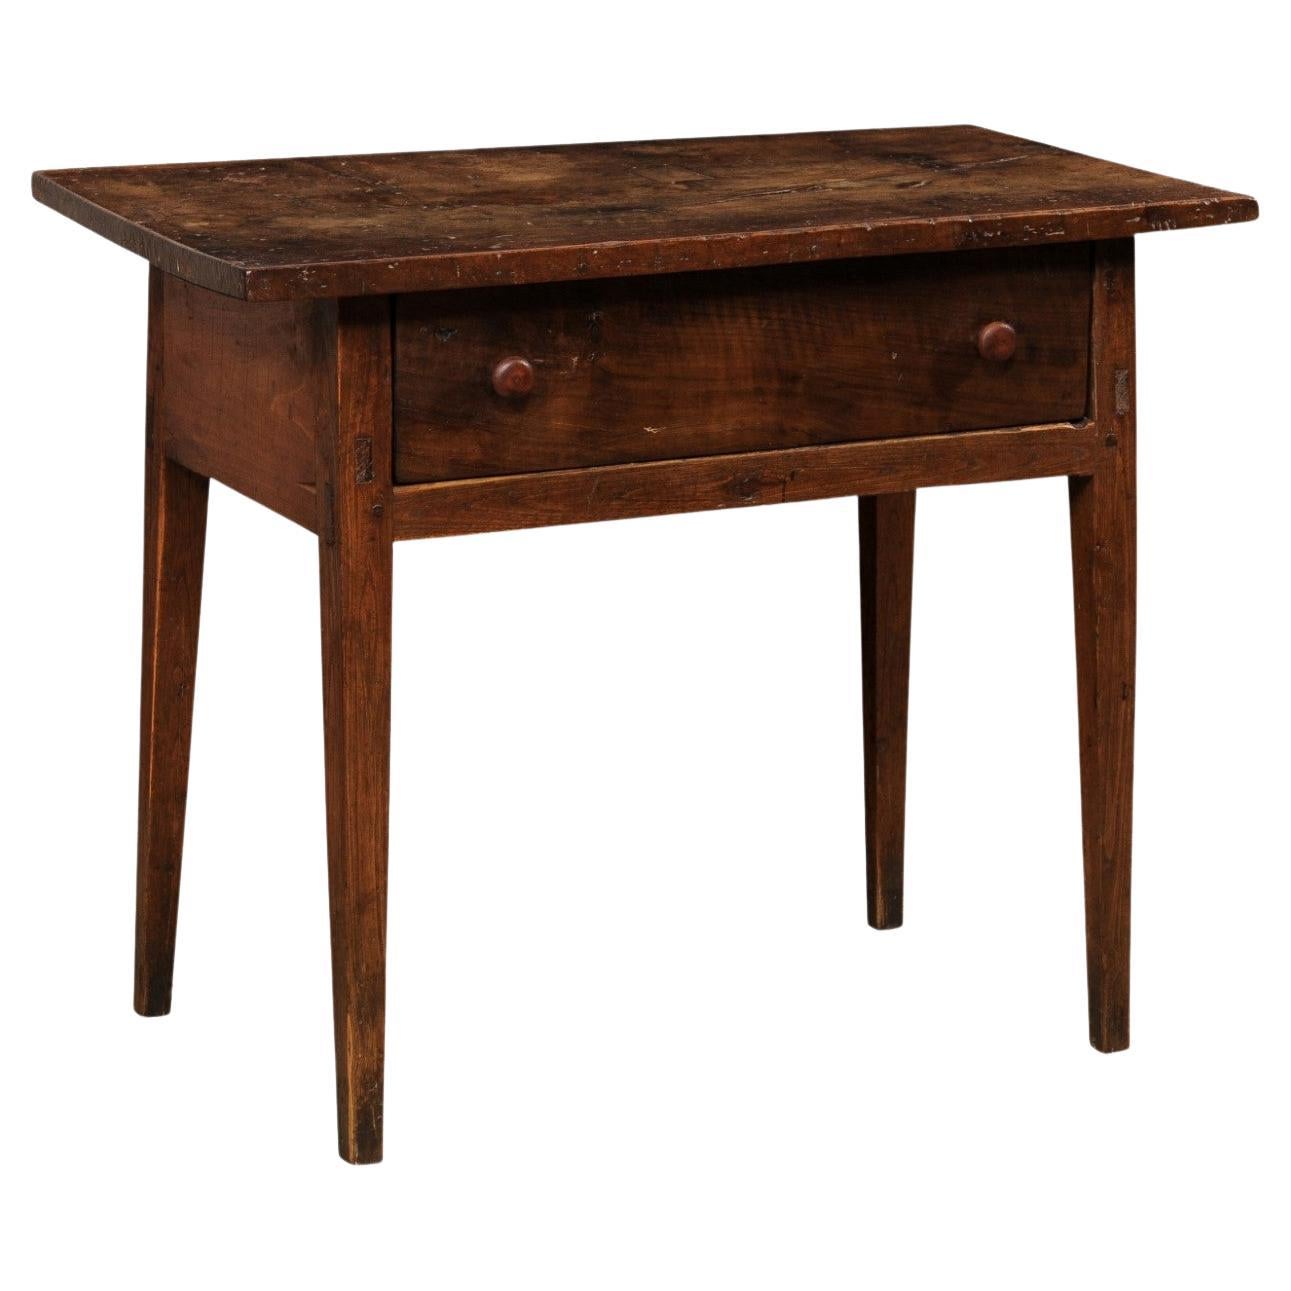 18th C. Spanish Carved-Walnut Table w/Drawer (Top has Fabulous Old Patina!) For Sale